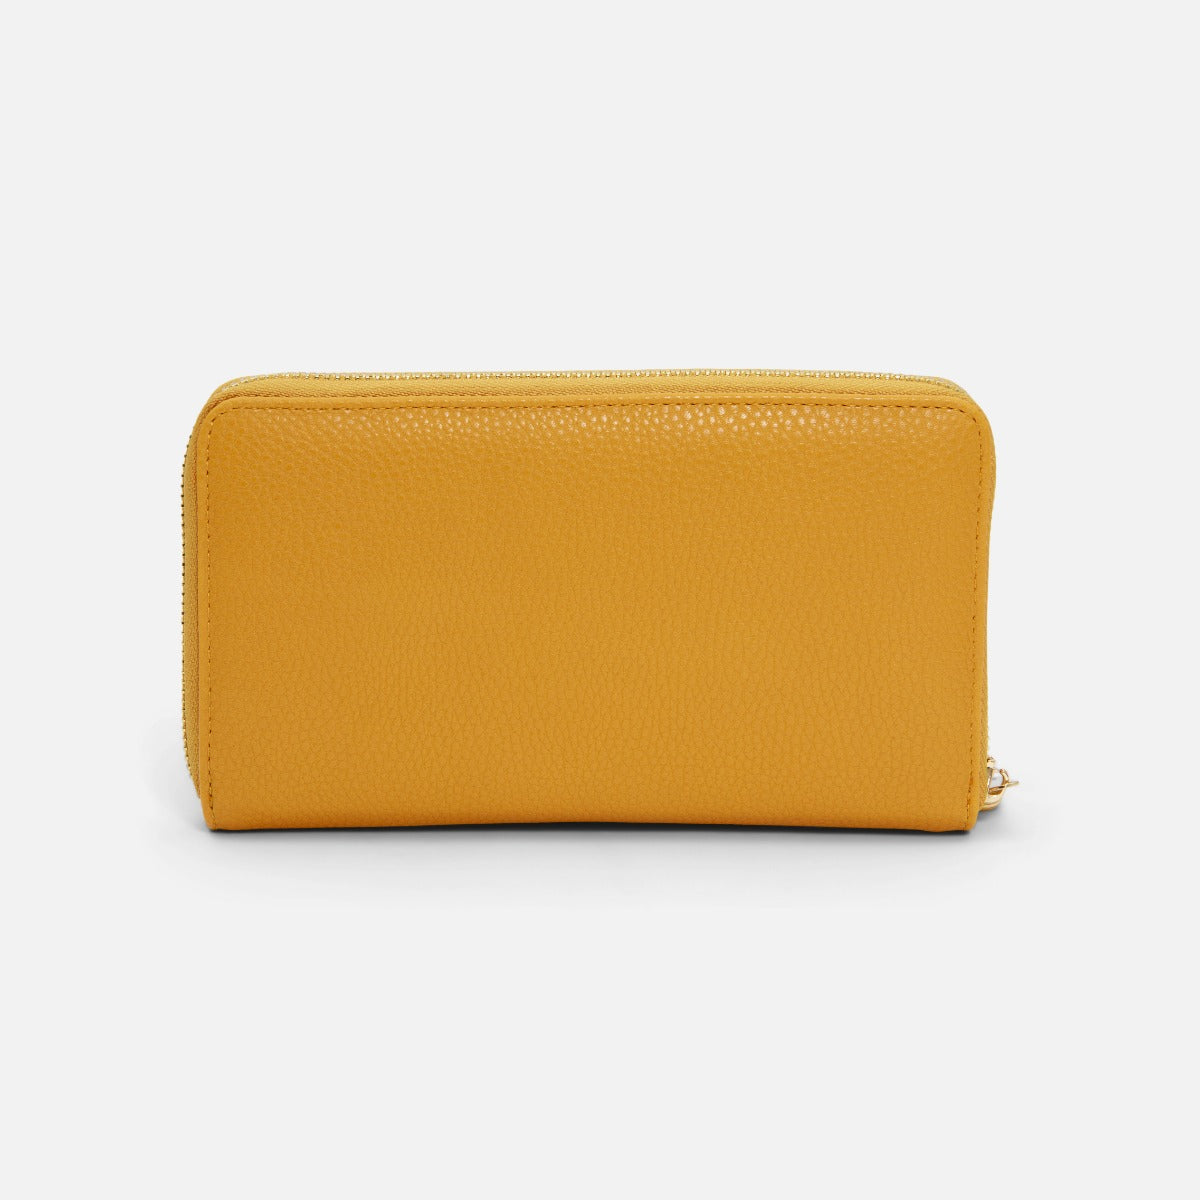 Ocher wallet and golden details with snake effect pattern removable pocket